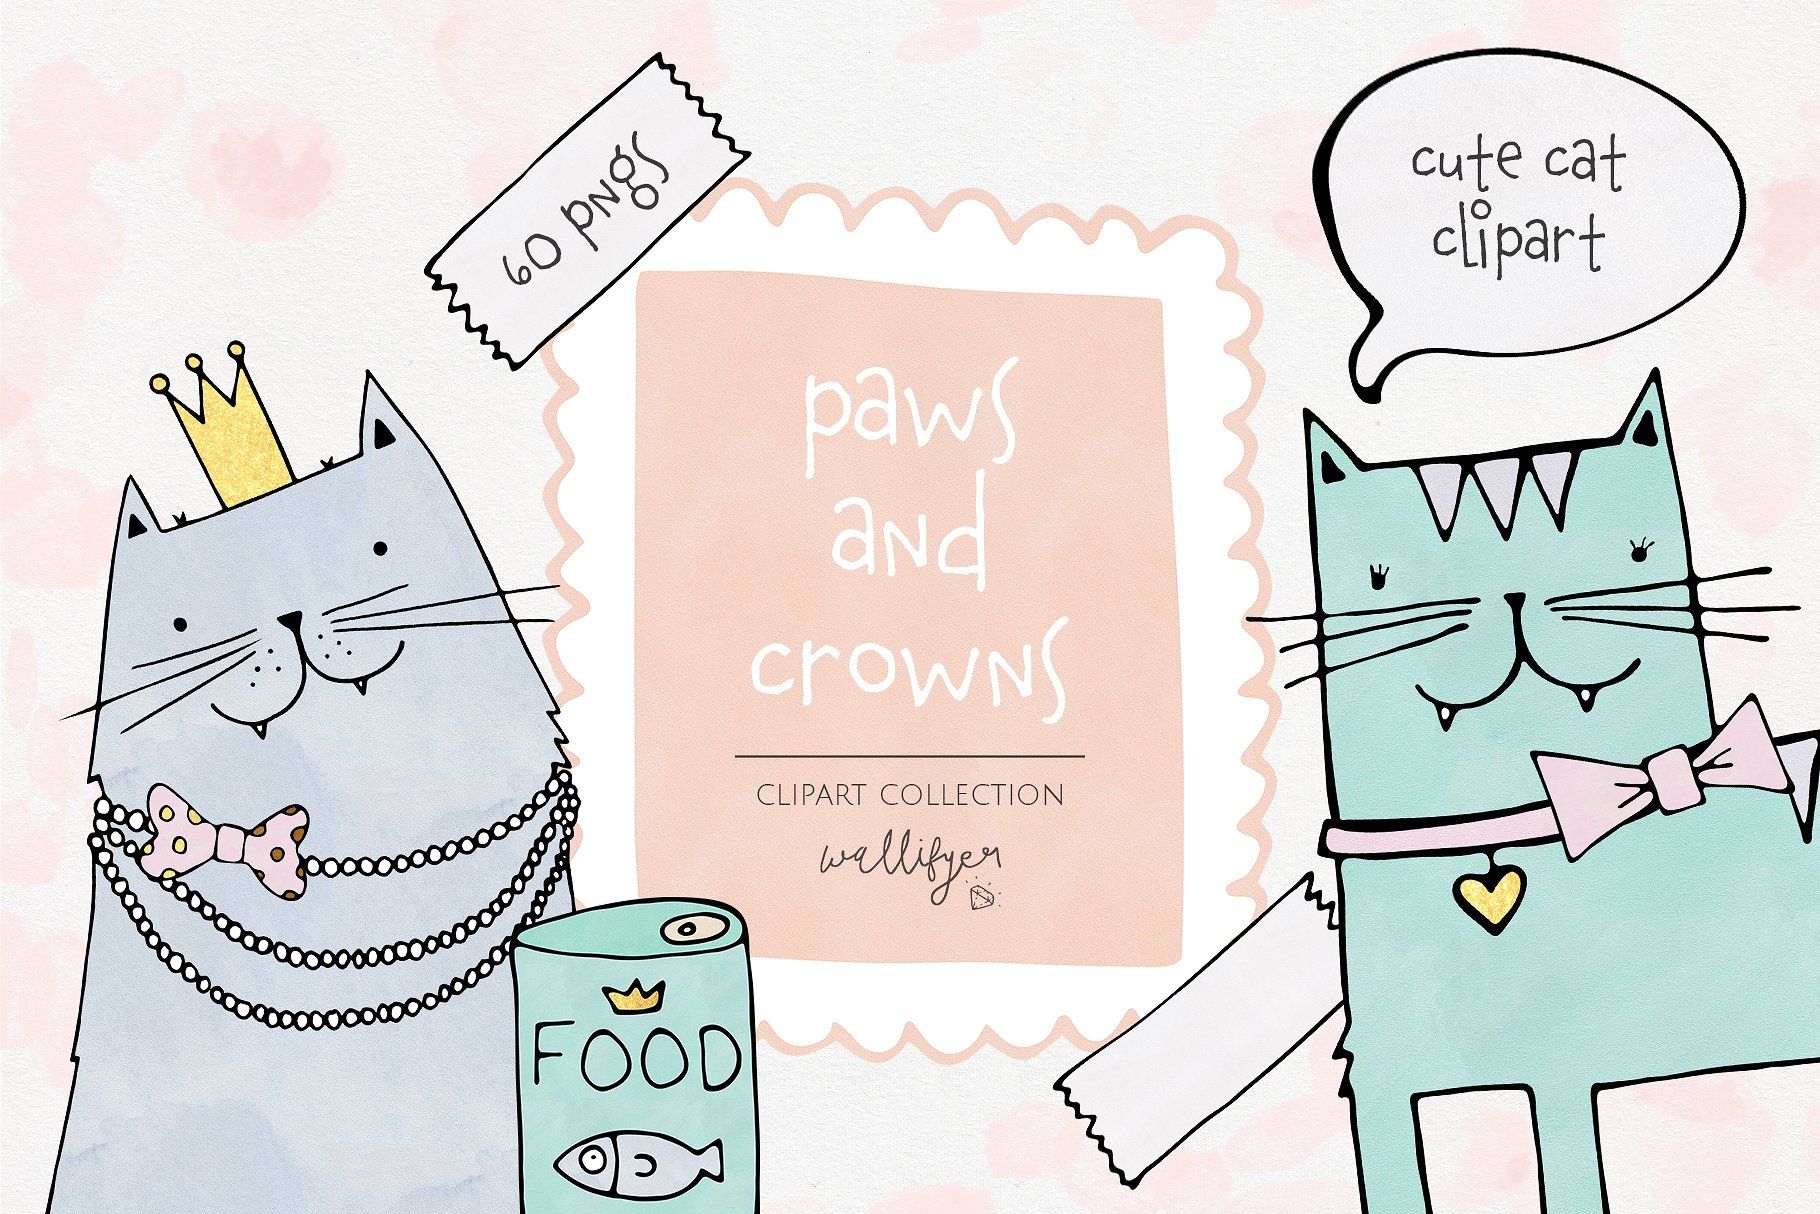 Cat clipart collection